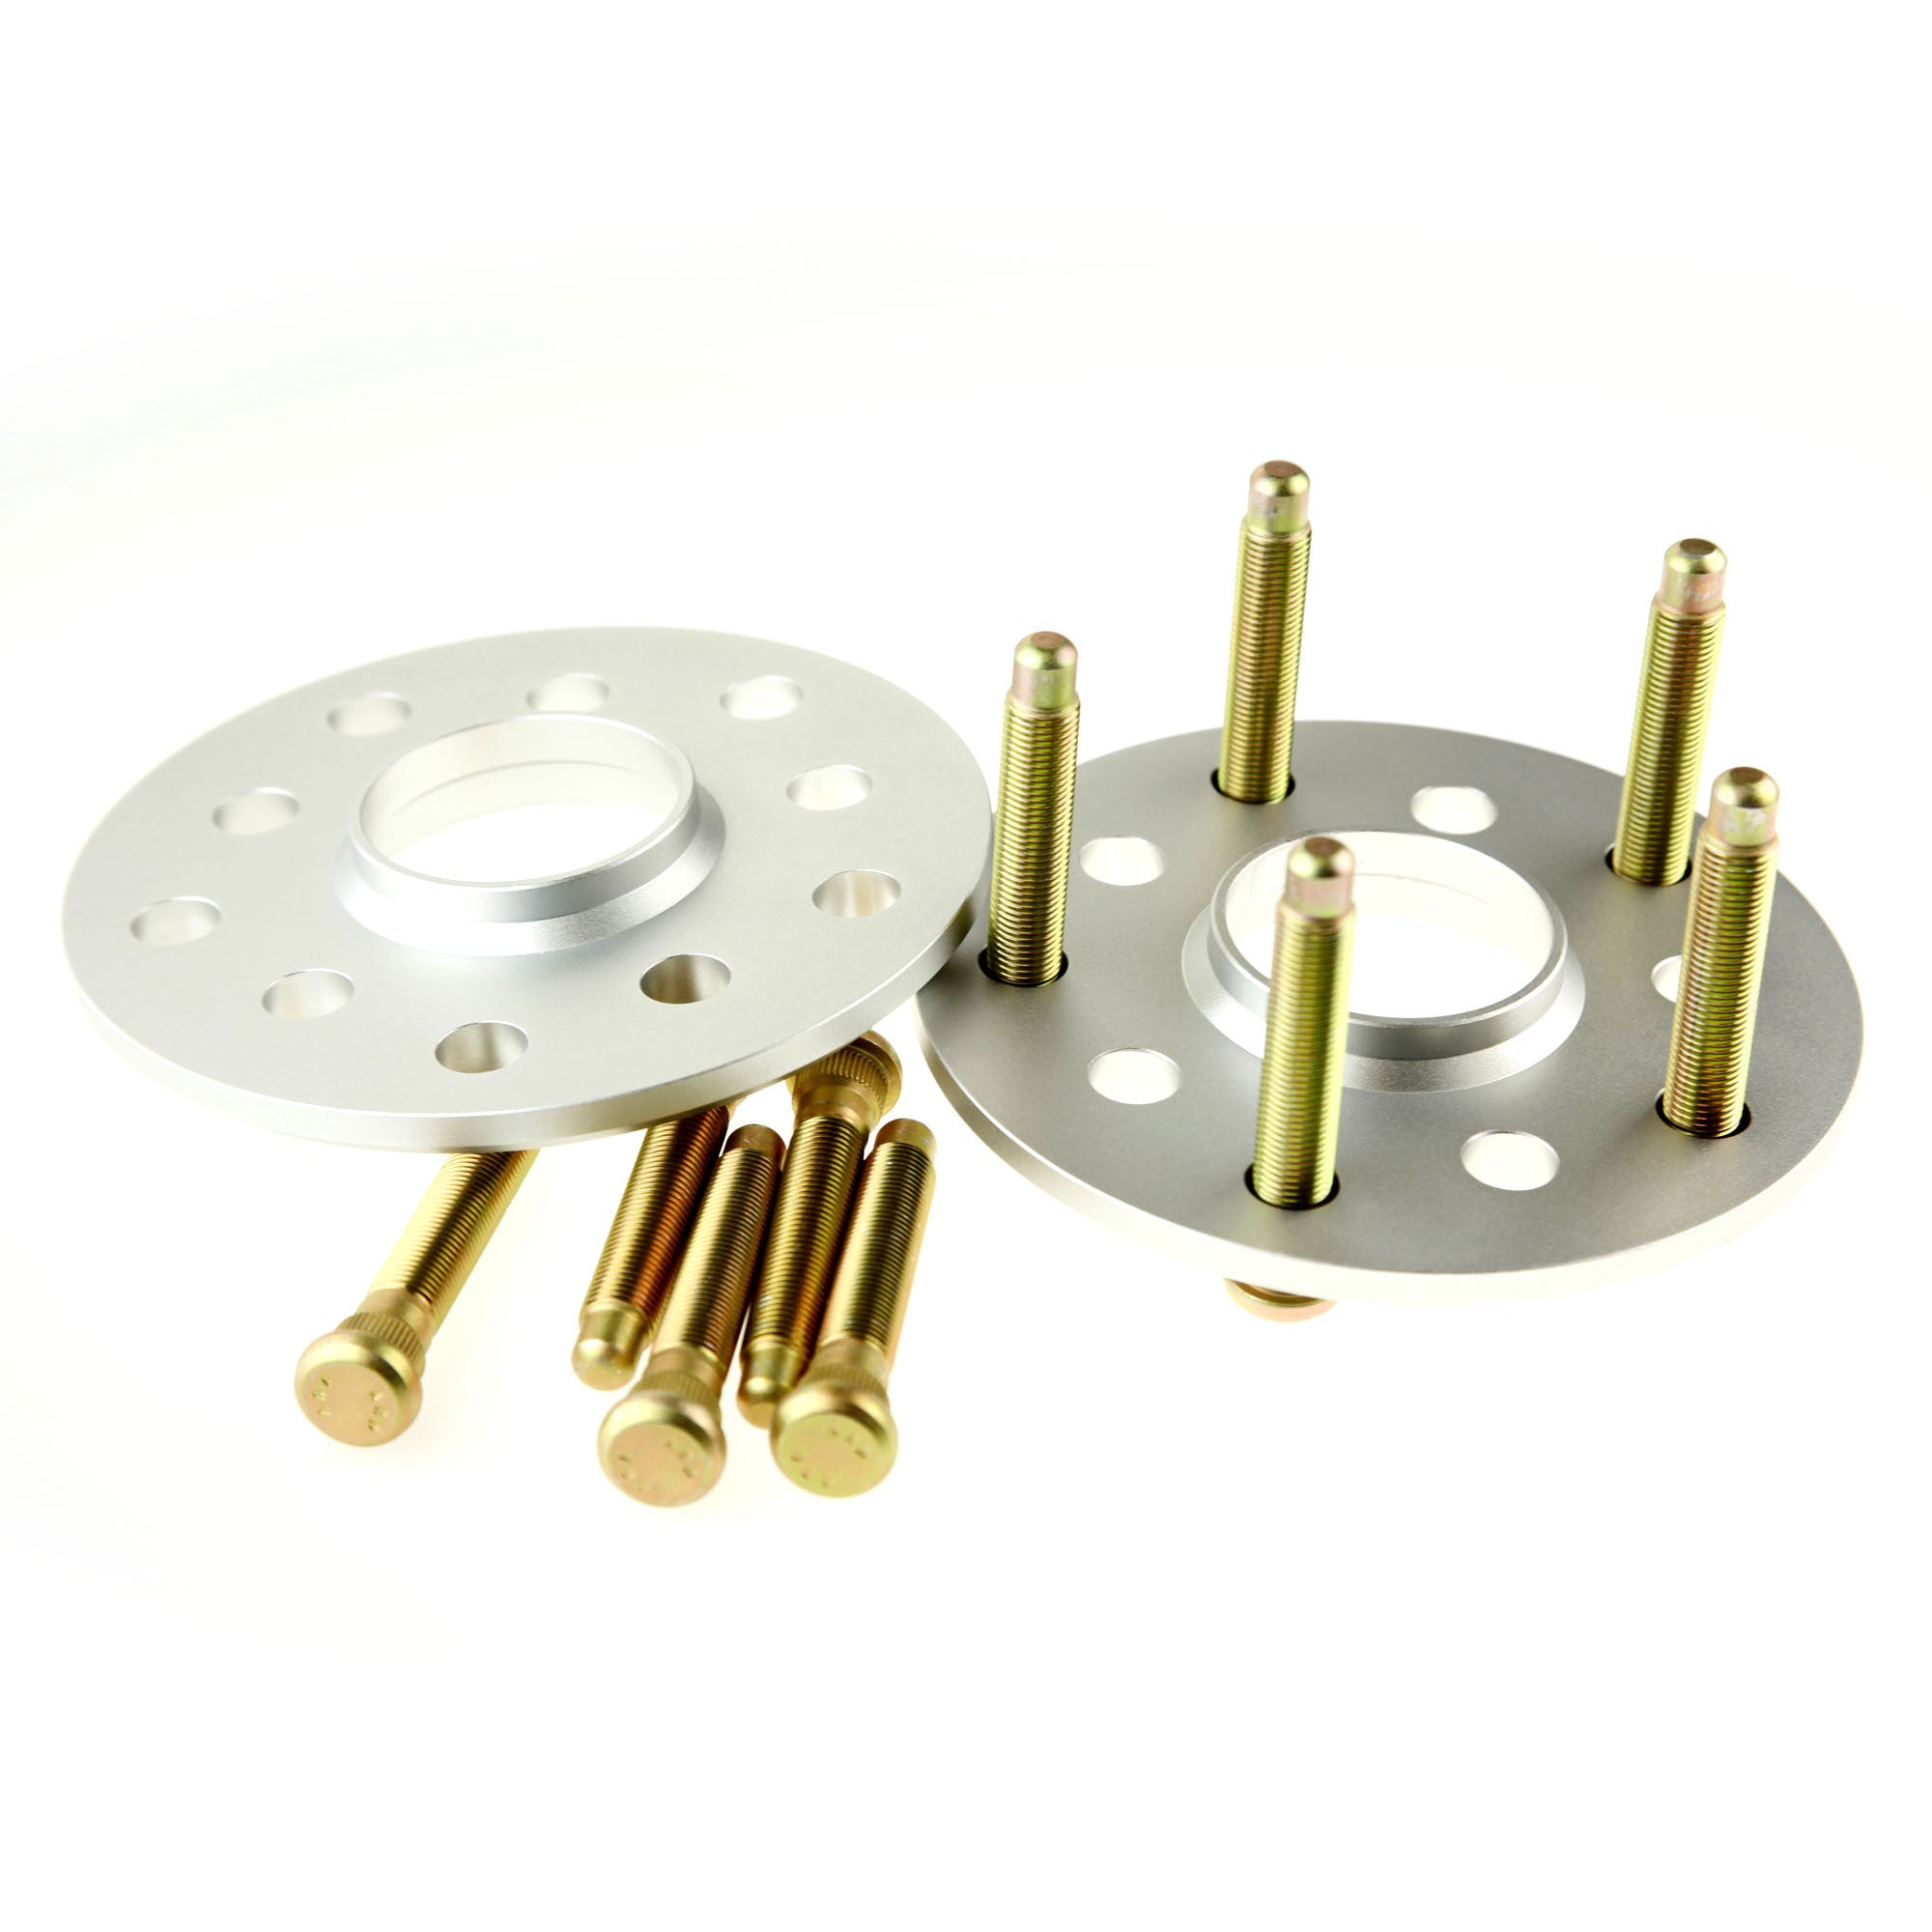 Mach V 10mm Spacer Kit With Wheel Studs